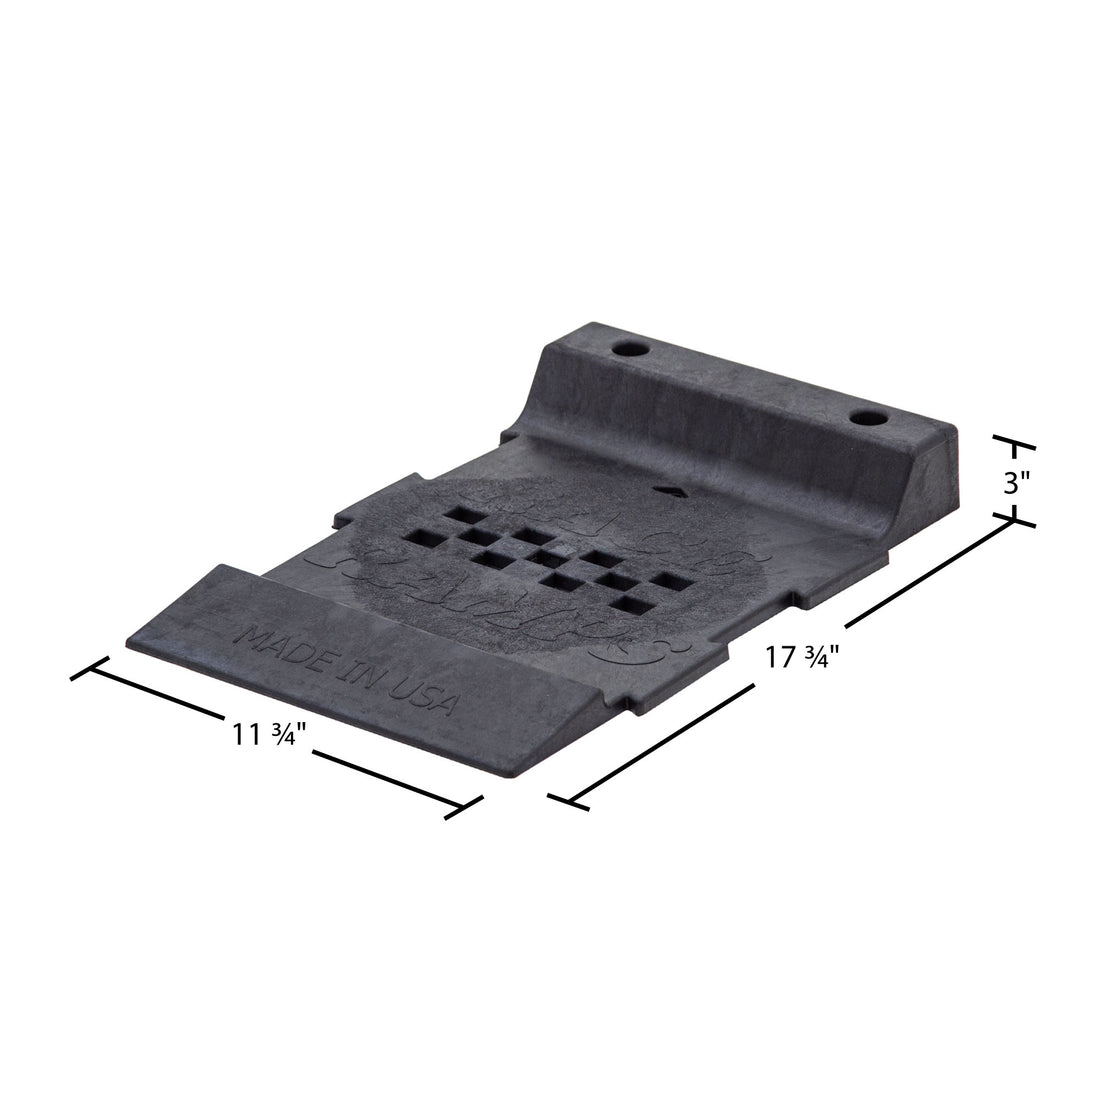 Race Ramps - Pro-Stop Parking Guide (2-pack)